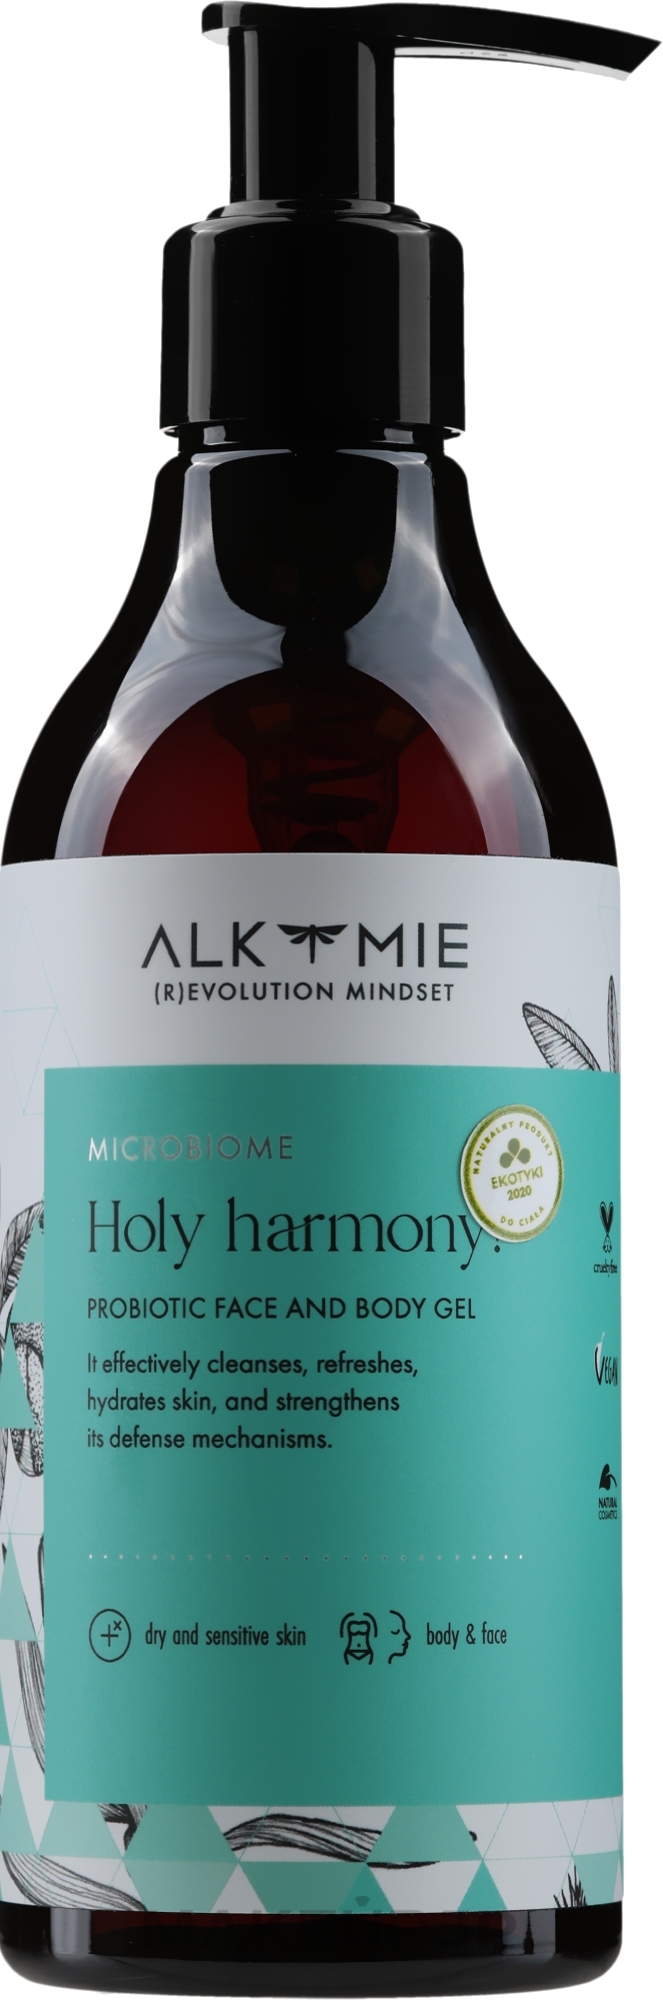 Face & Body Gel - Alkmie Holy Harmony Probiotic Face and Body Gel — photo 250 ml